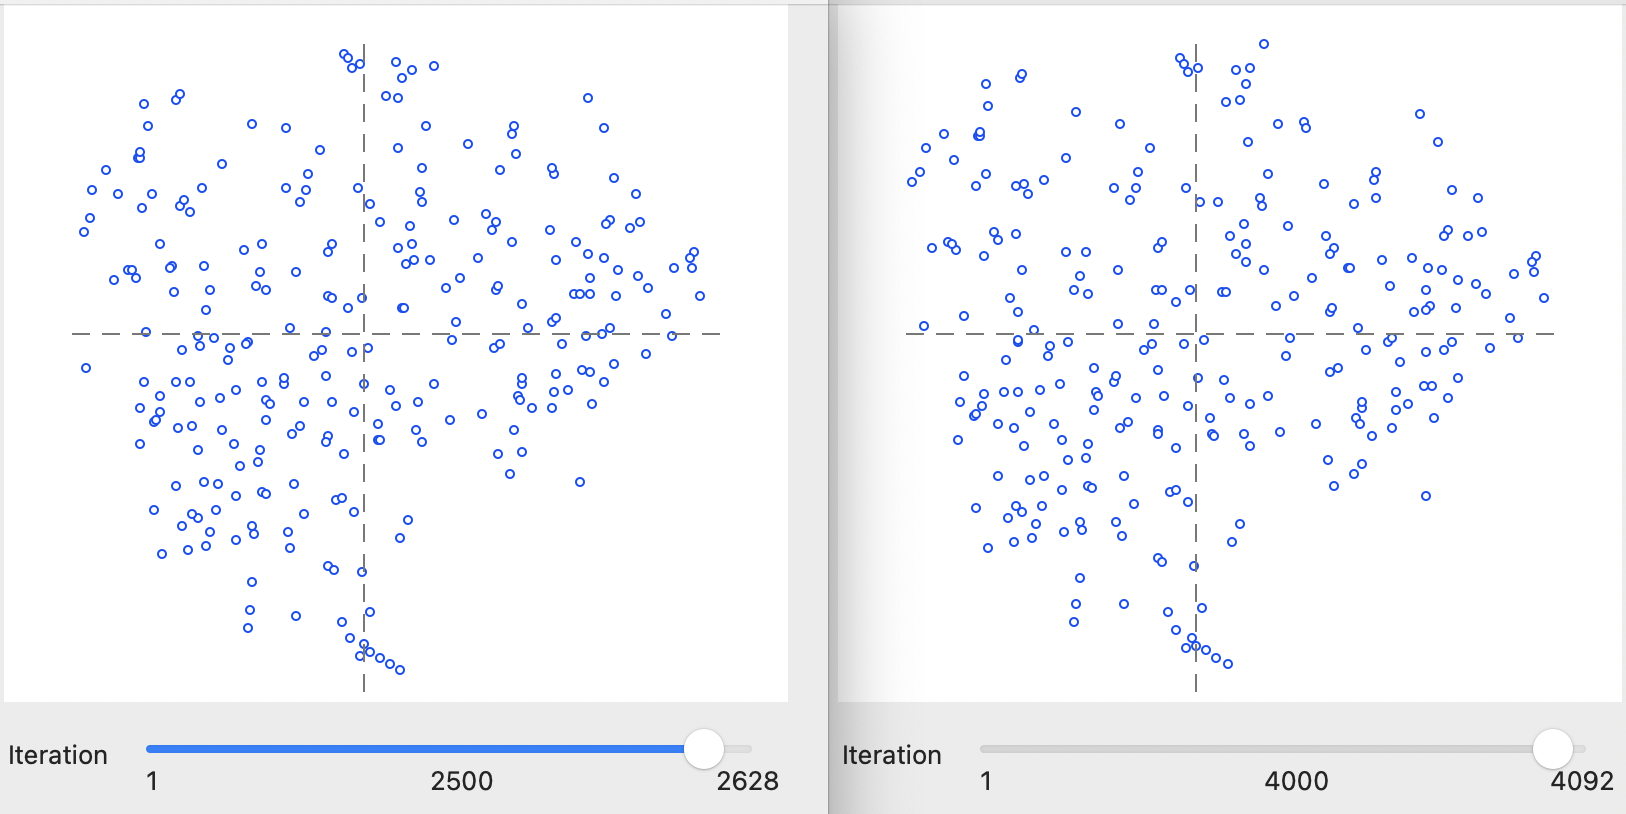 Inspecting interations of t-SNE algorithm: 1000 and 3000